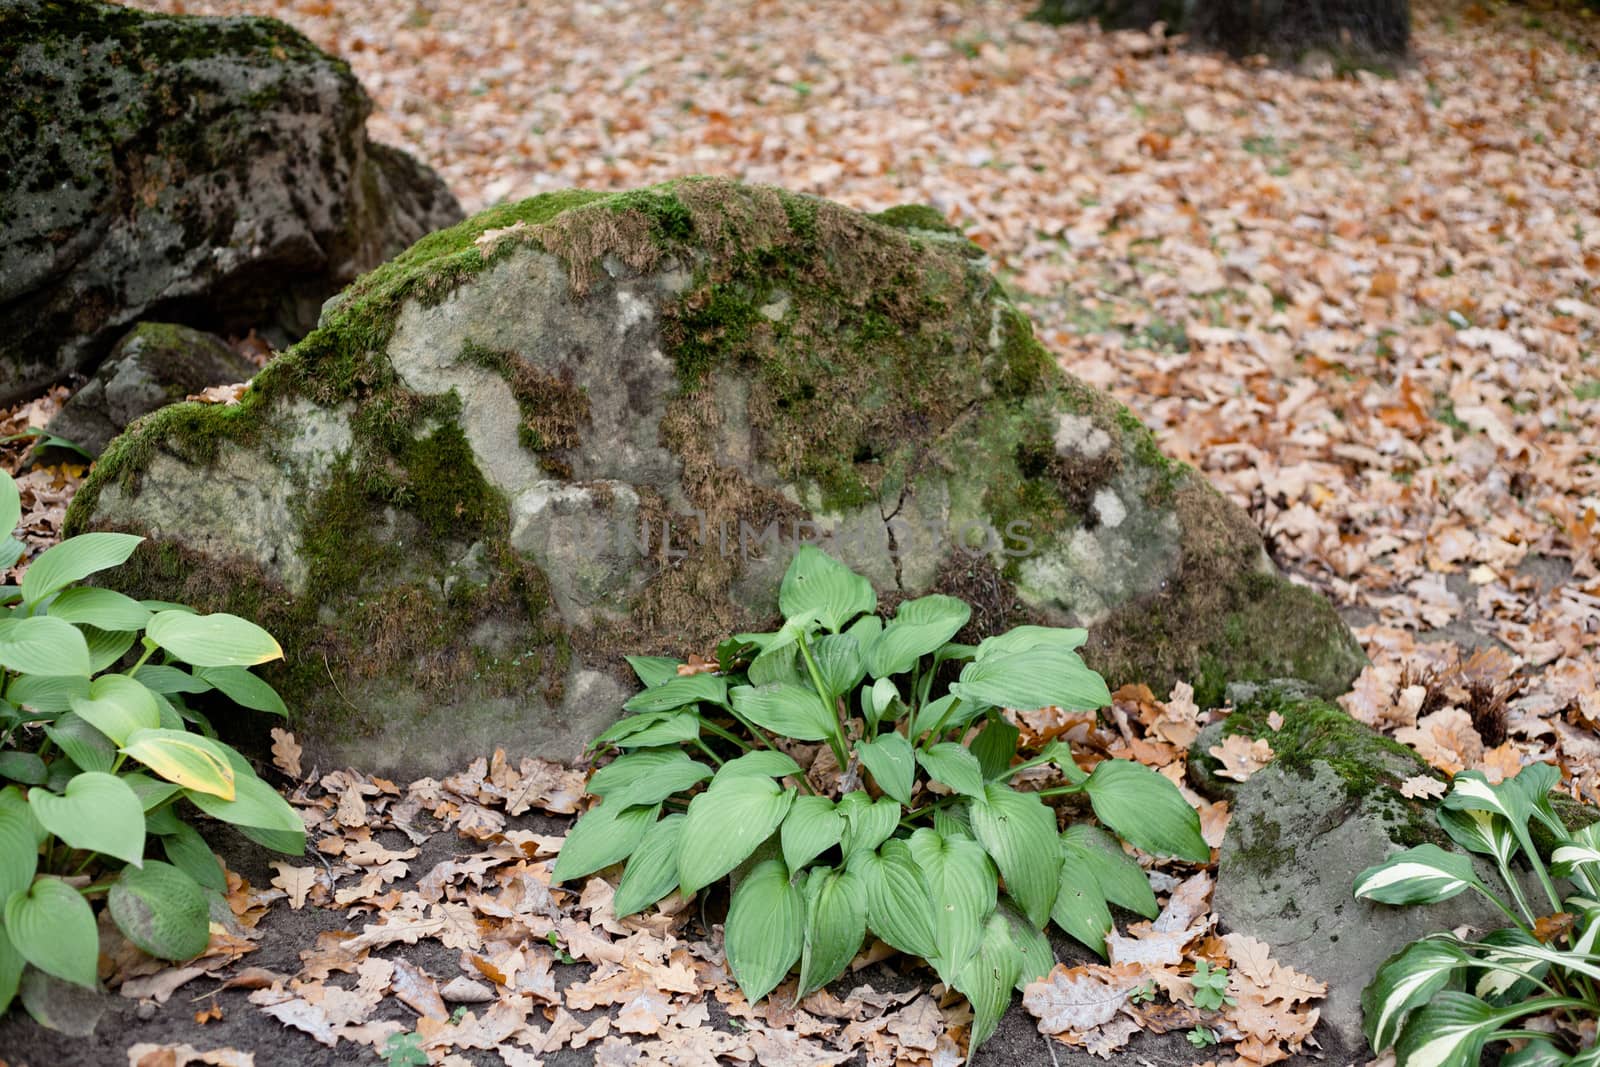 Green plants, stones and brown leaves
